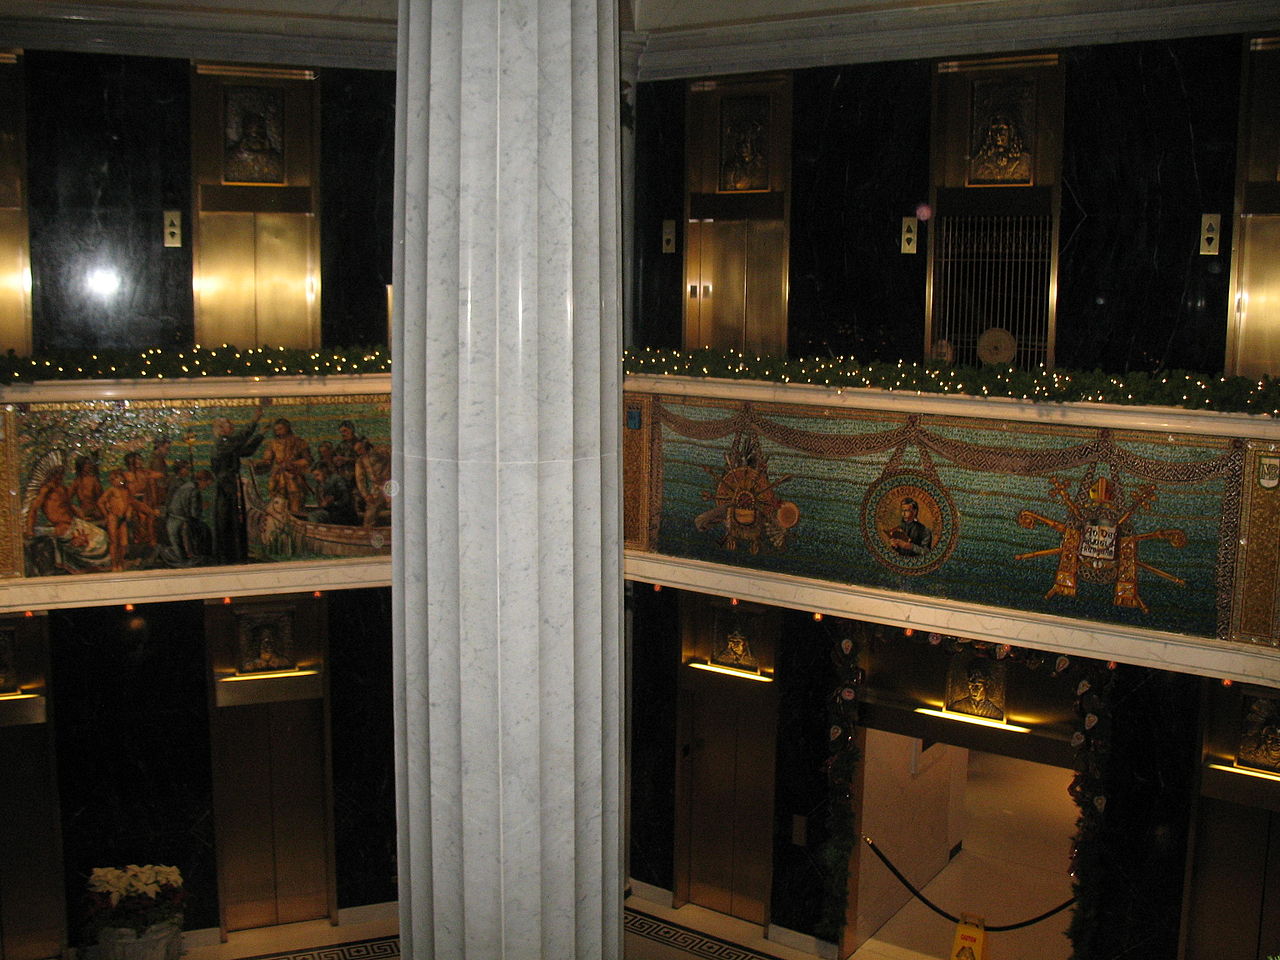 The lobby includes mosaics honoring Marquette that were made by Louis Comfort Tiffany-son of the famous jeweler Charles Tiffany. 